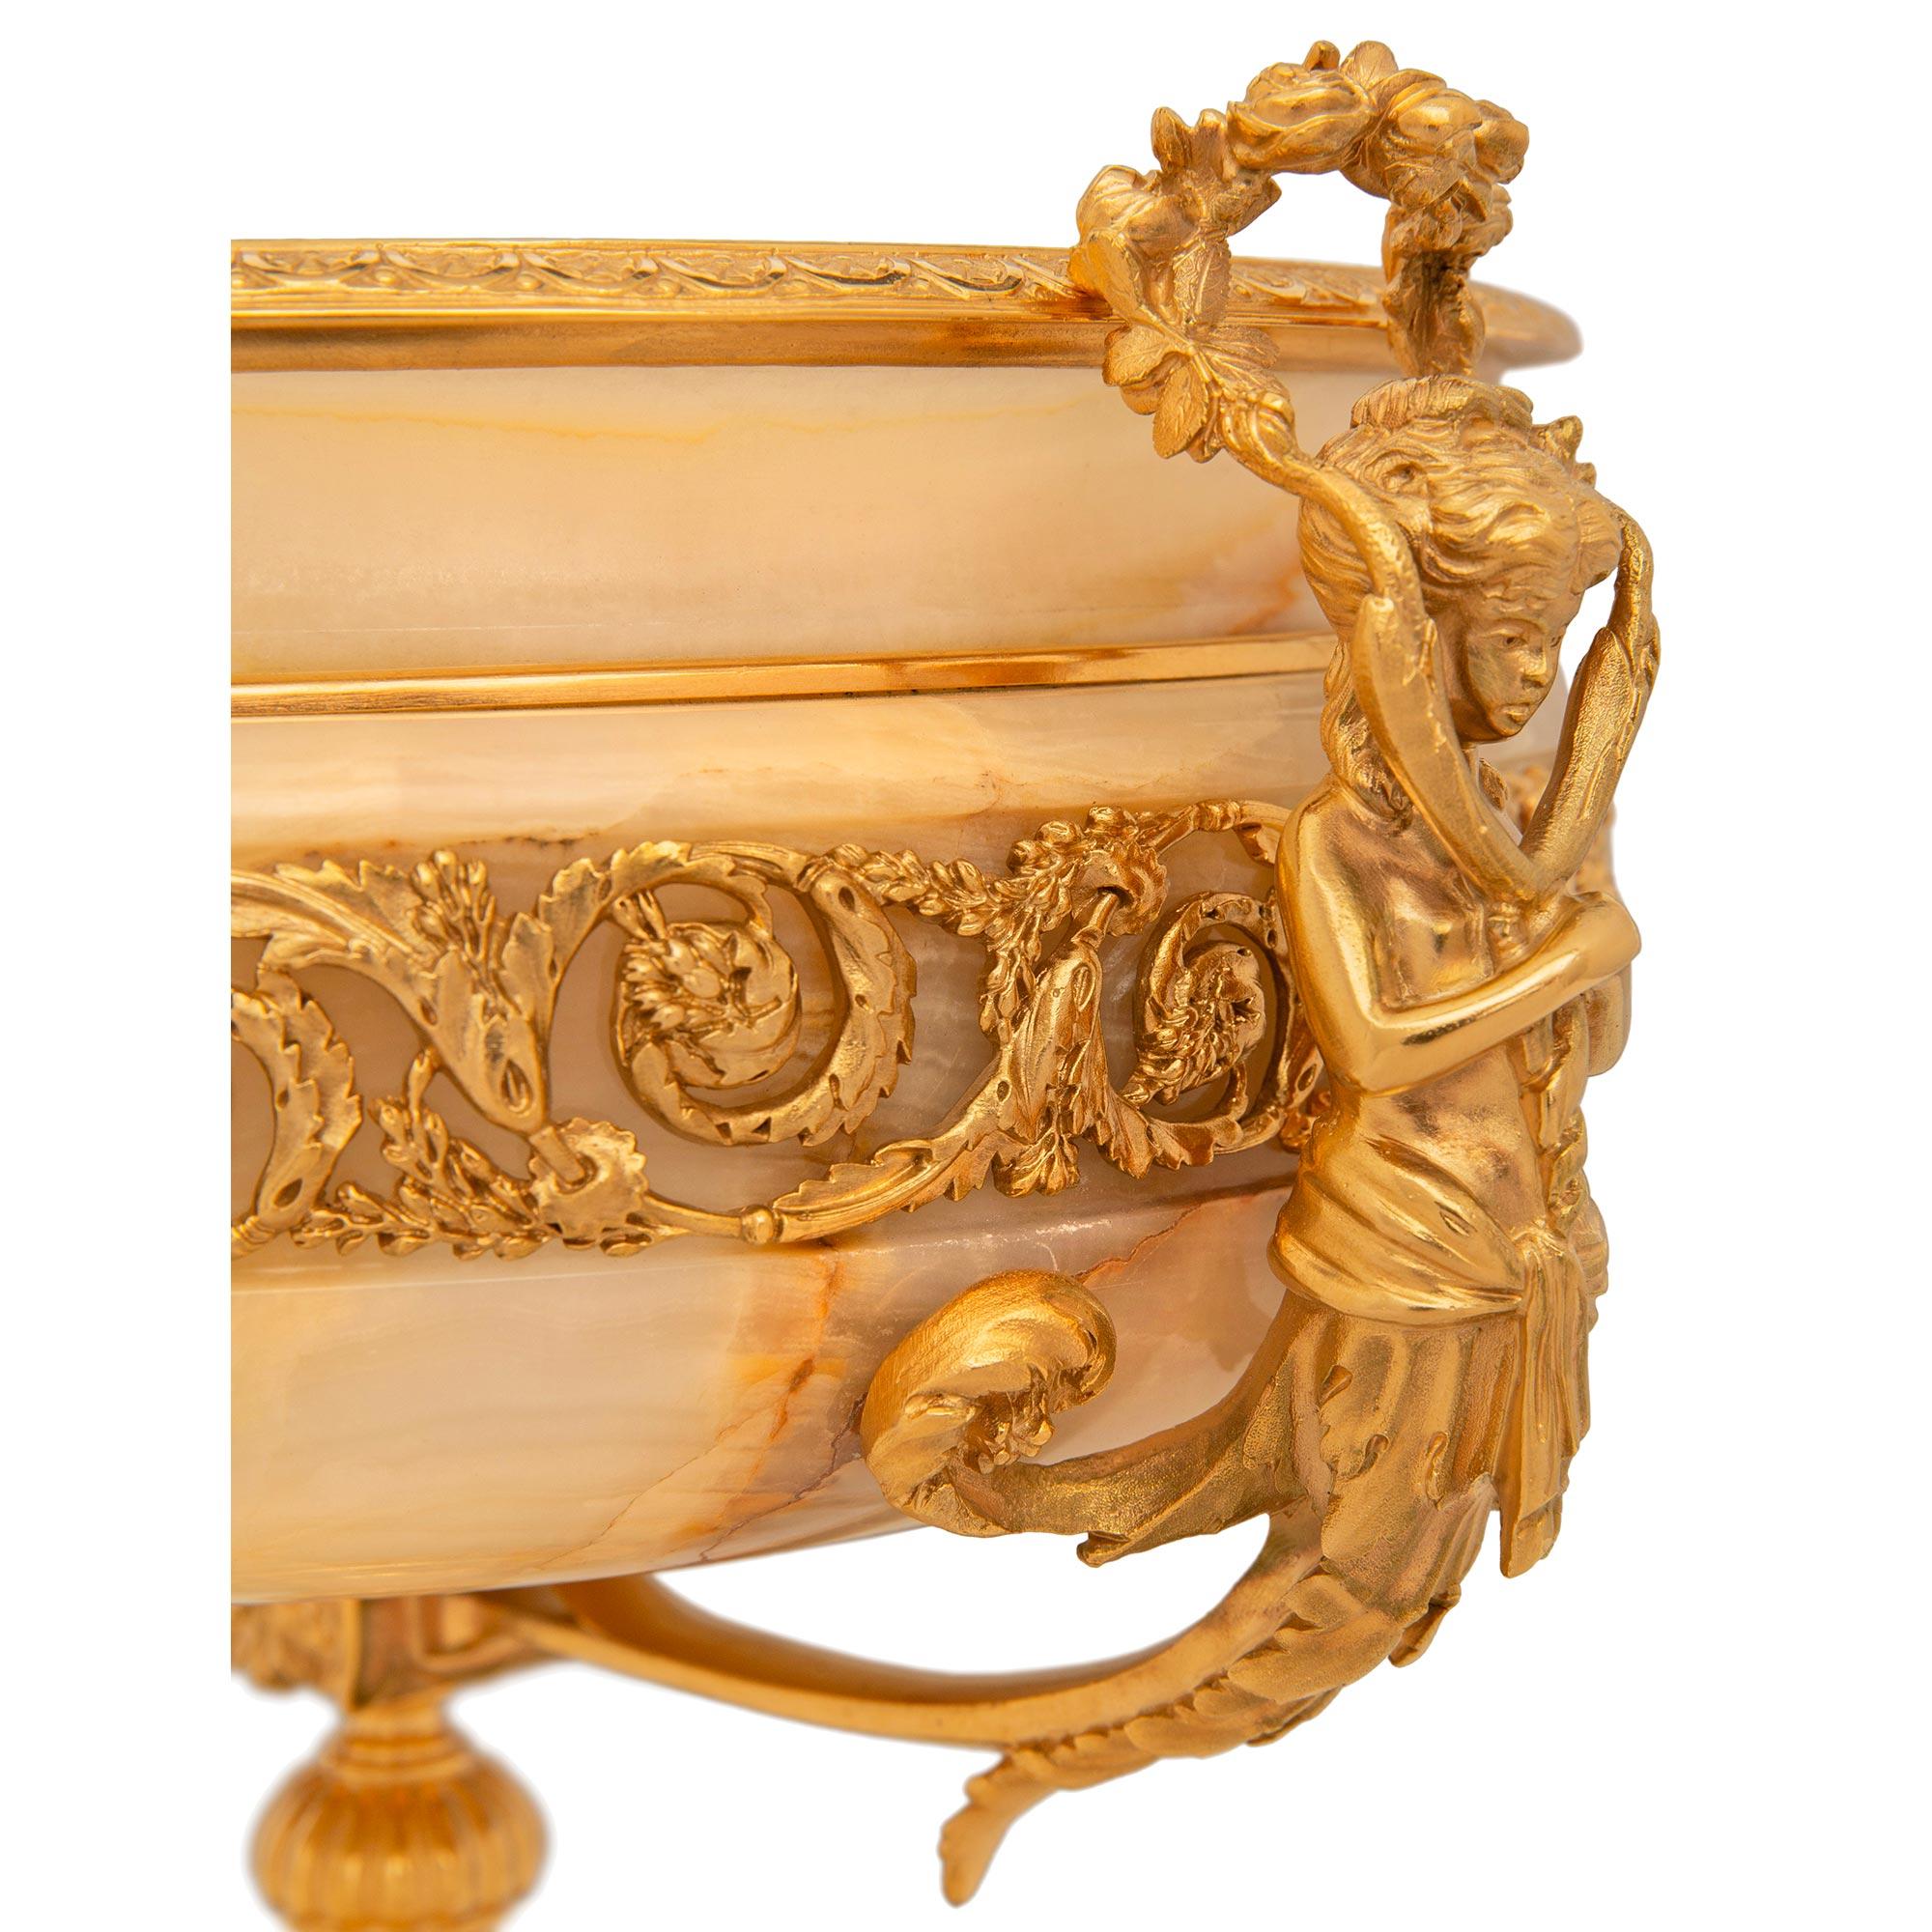 French 19th century Louis XVI st. Onyx and Ormolu urn/centerpiece For Sale 2